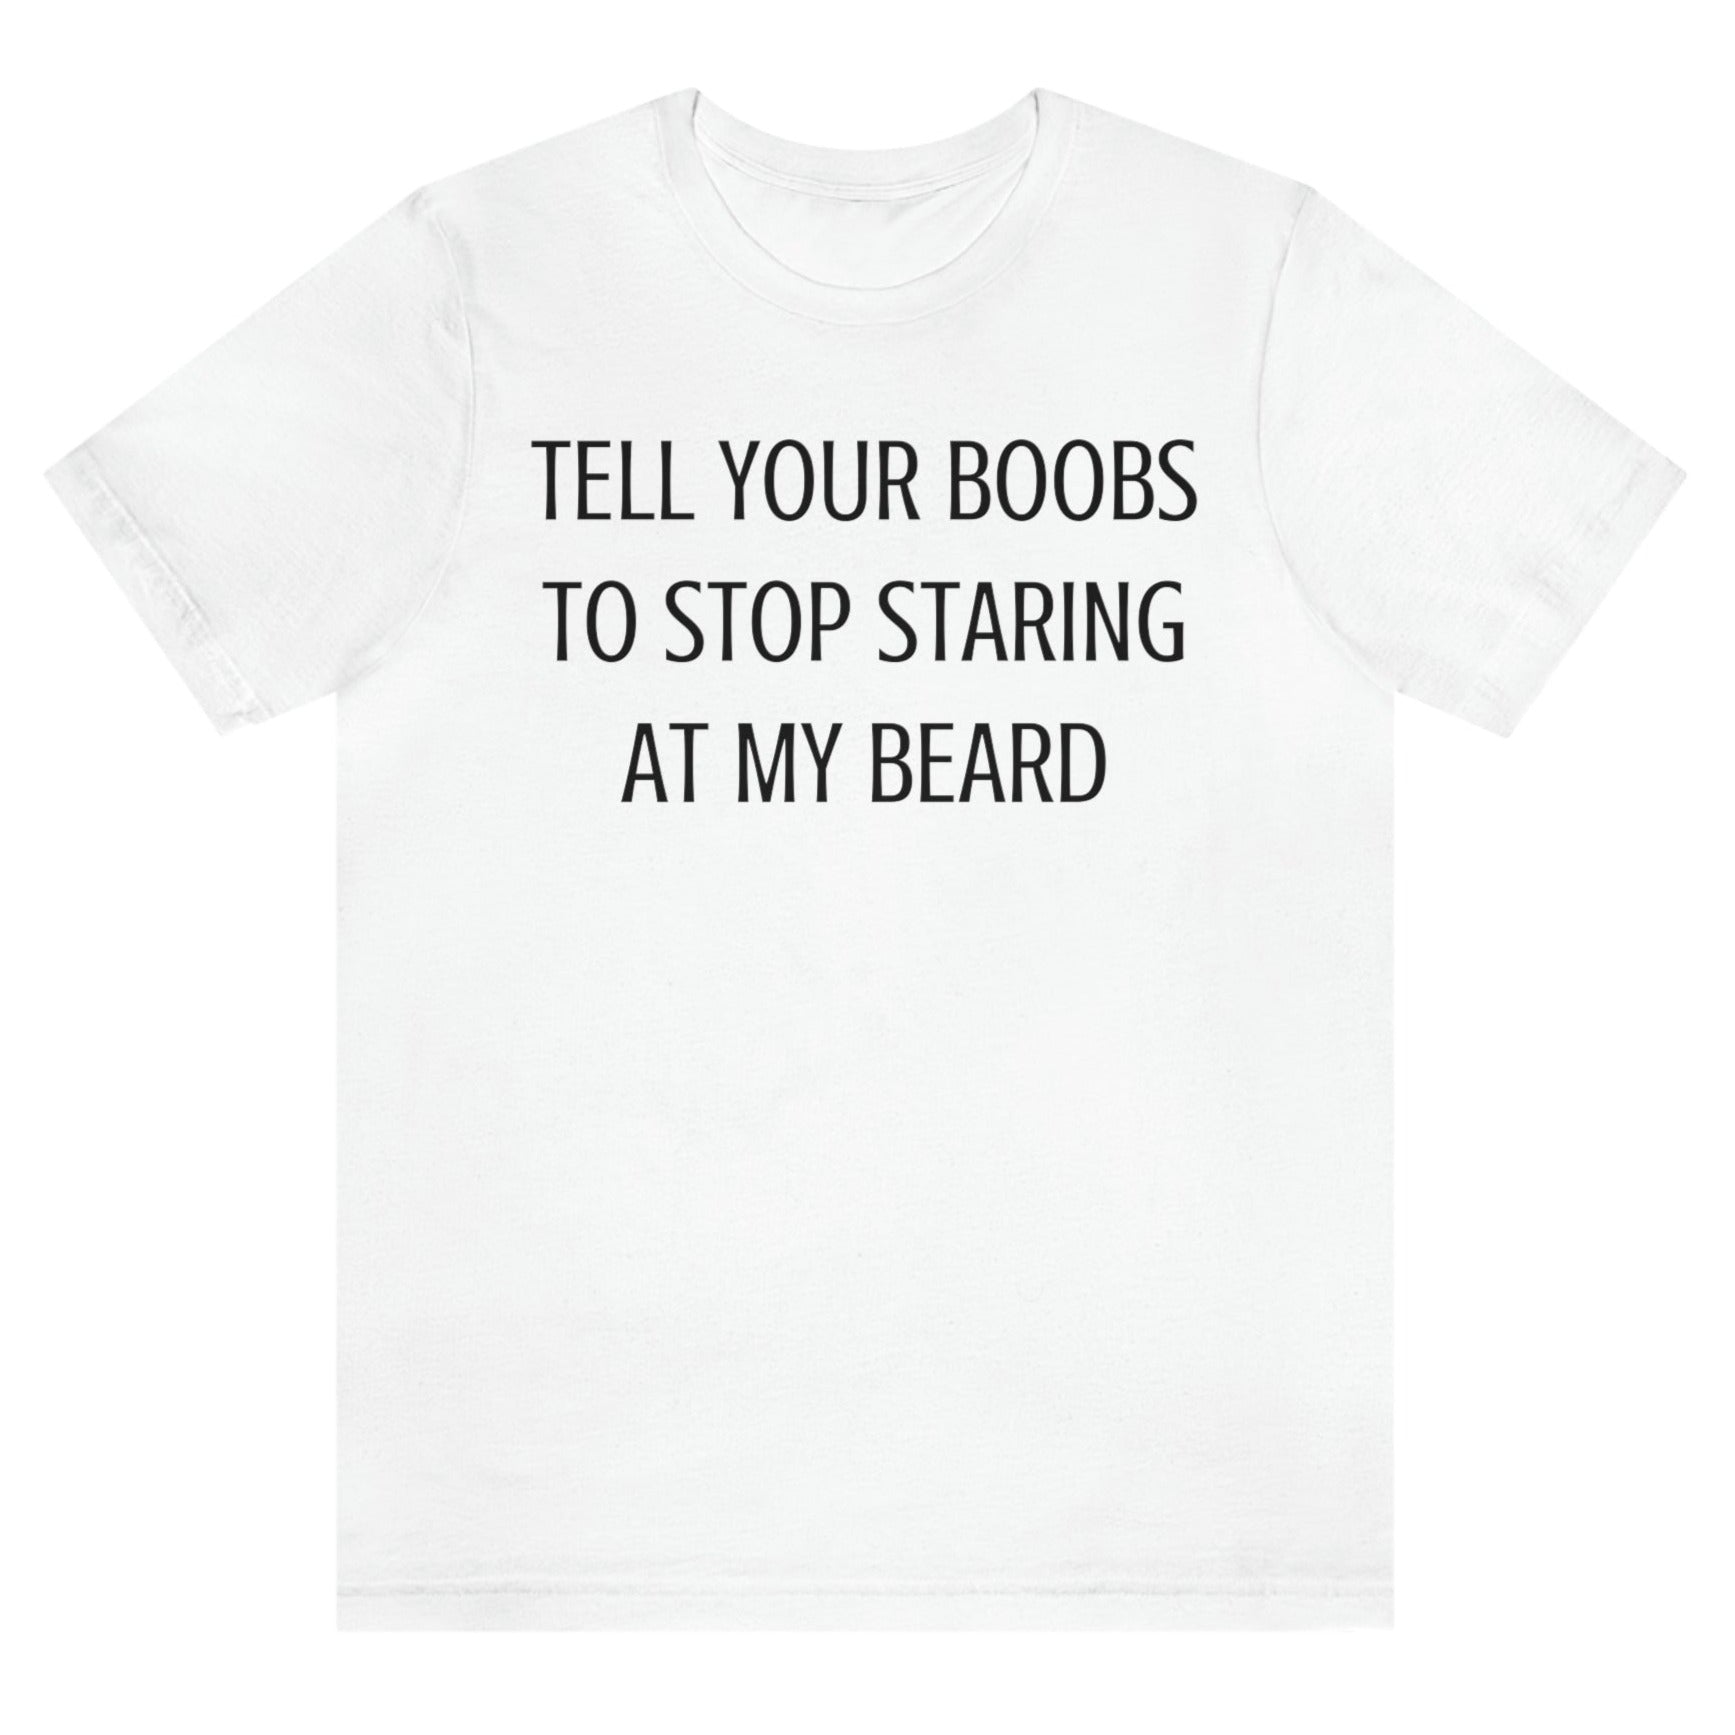 tell-your-boobs-to-stop-staring-at-my-beard-white-t-shirt-mens-funny